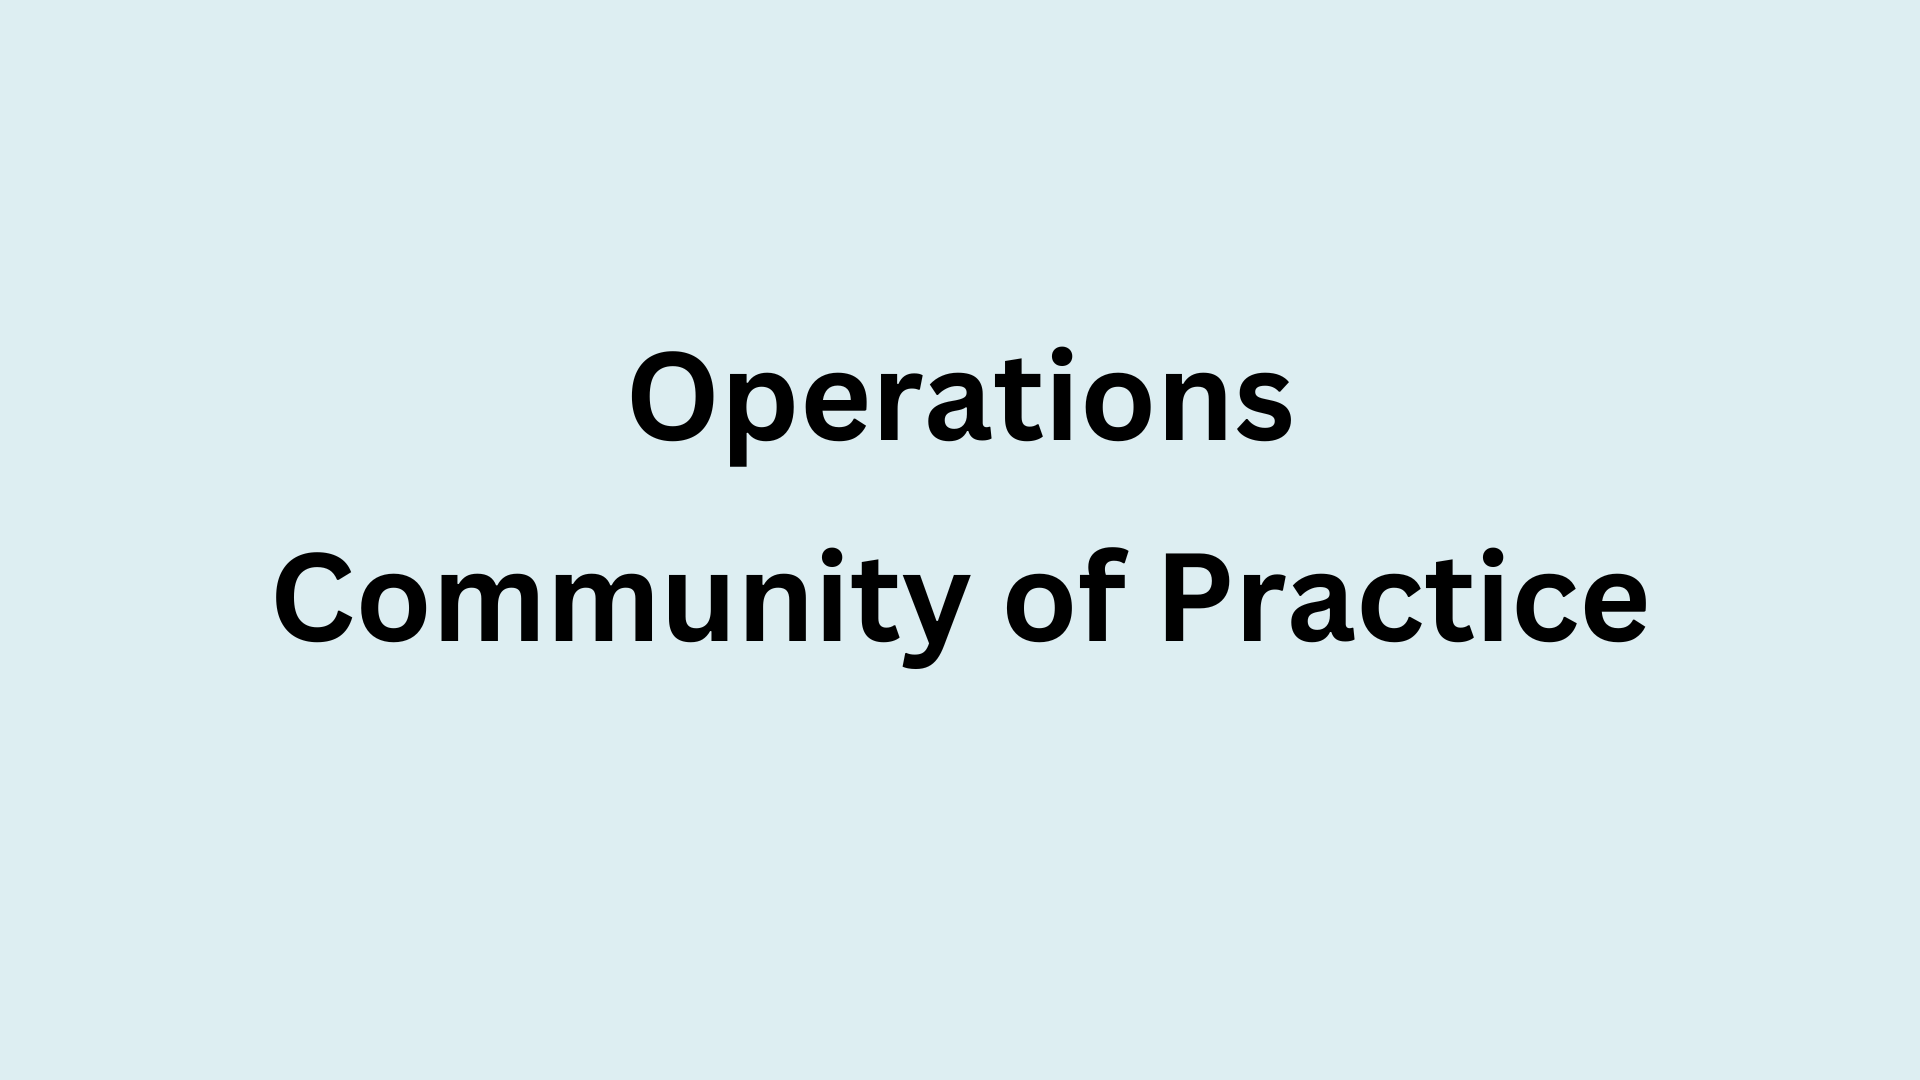 Operations Community of Practice